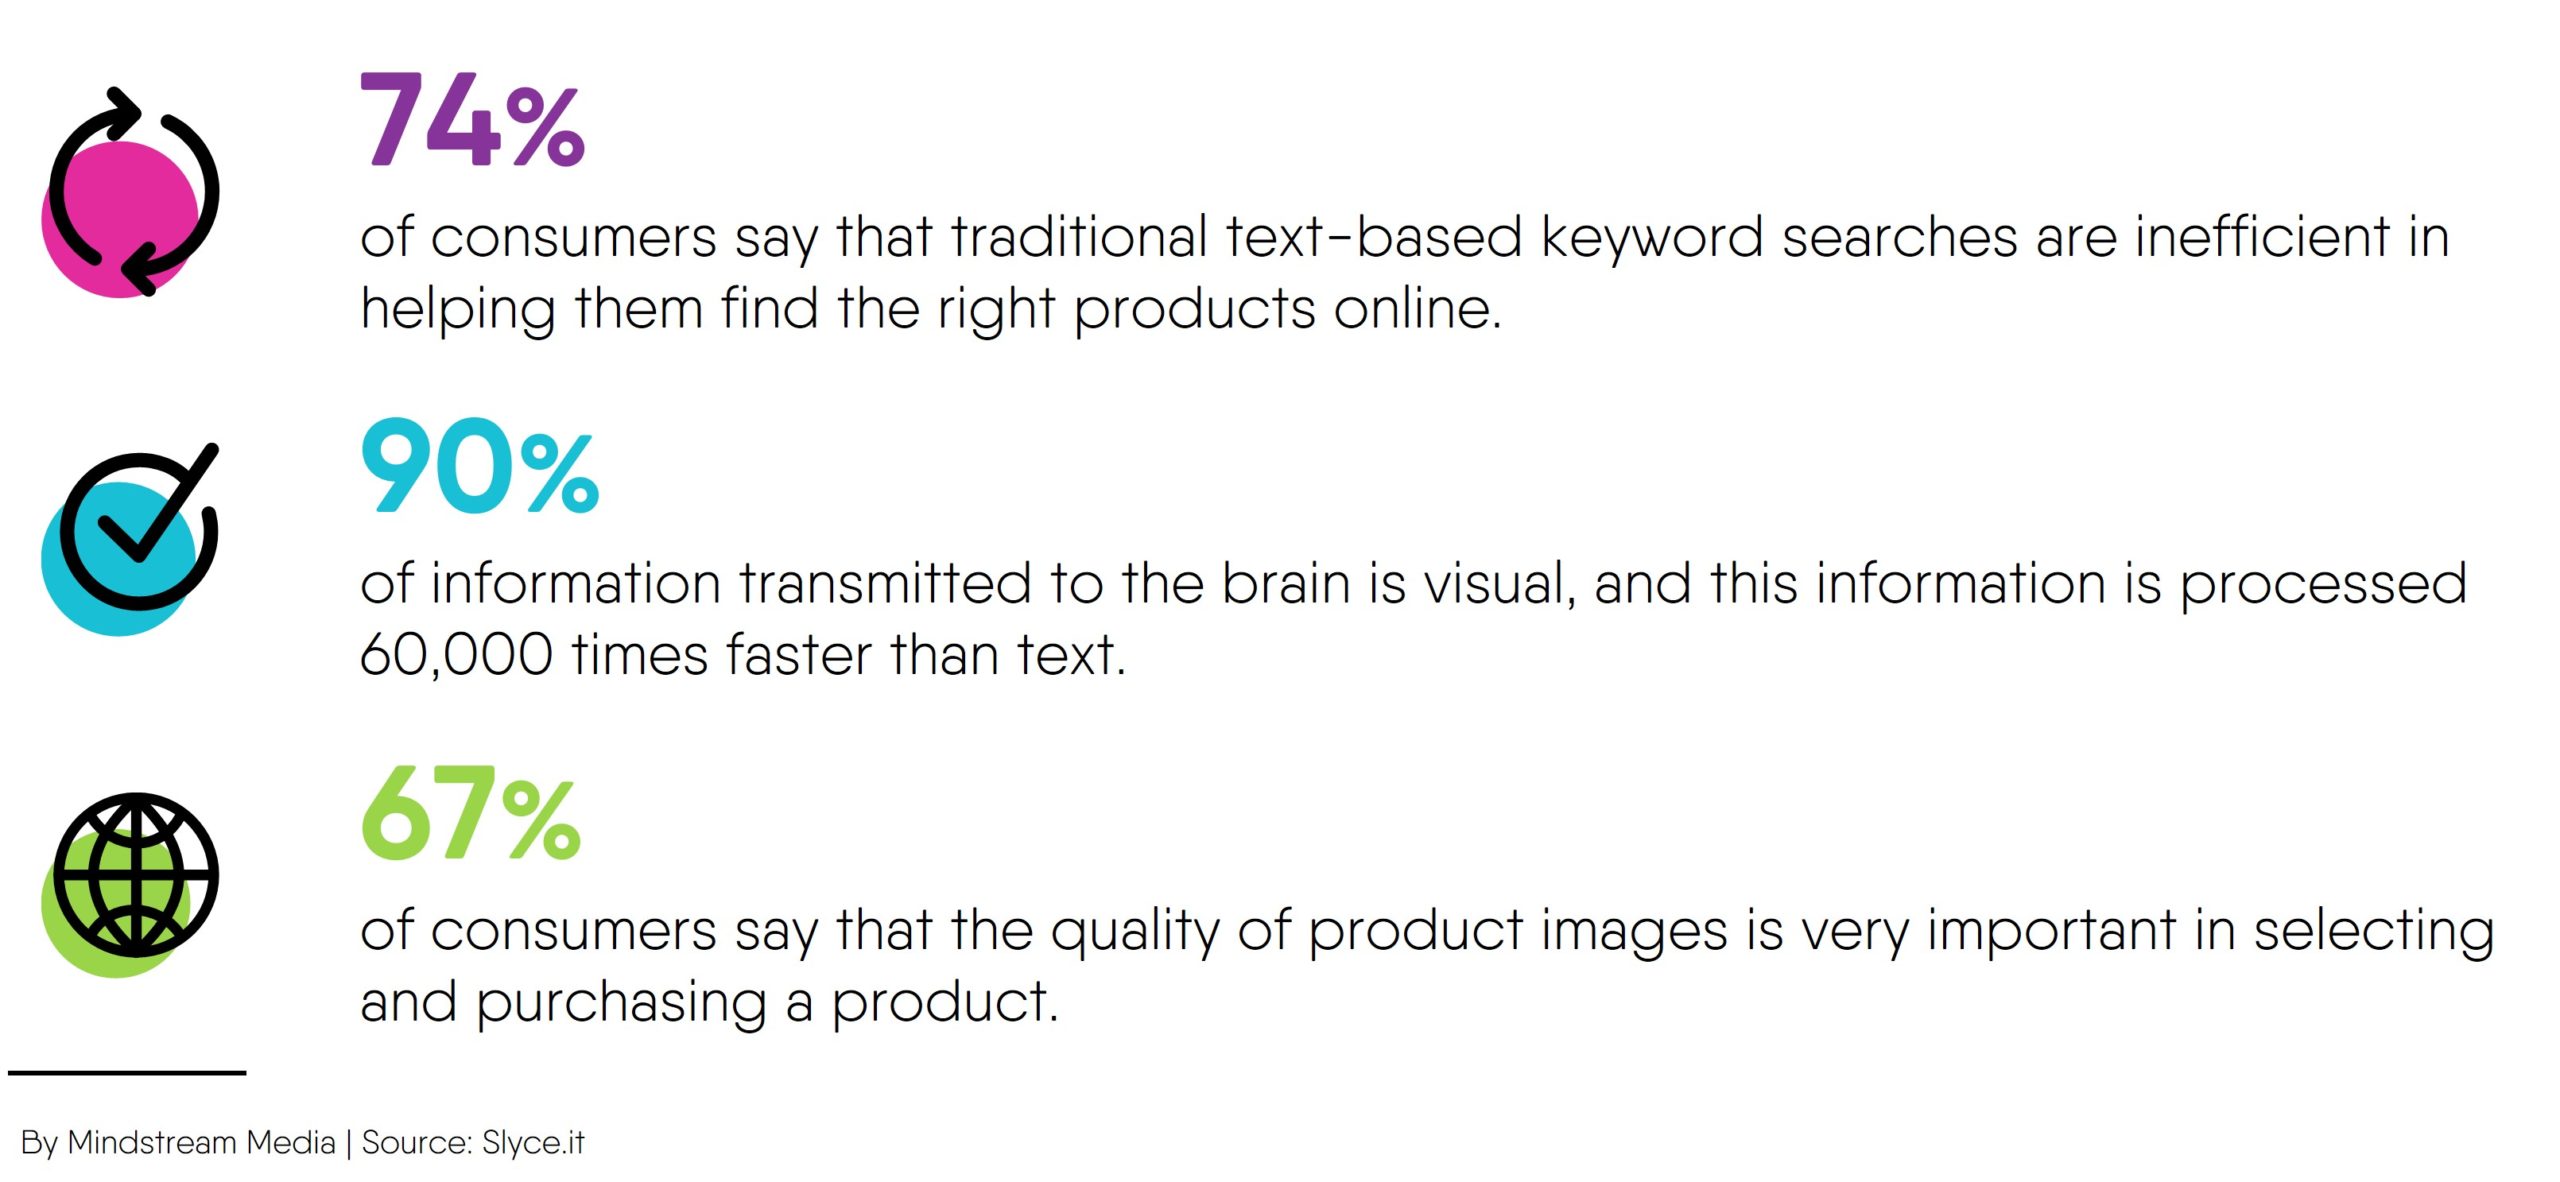 How personalization is changing text-based search results